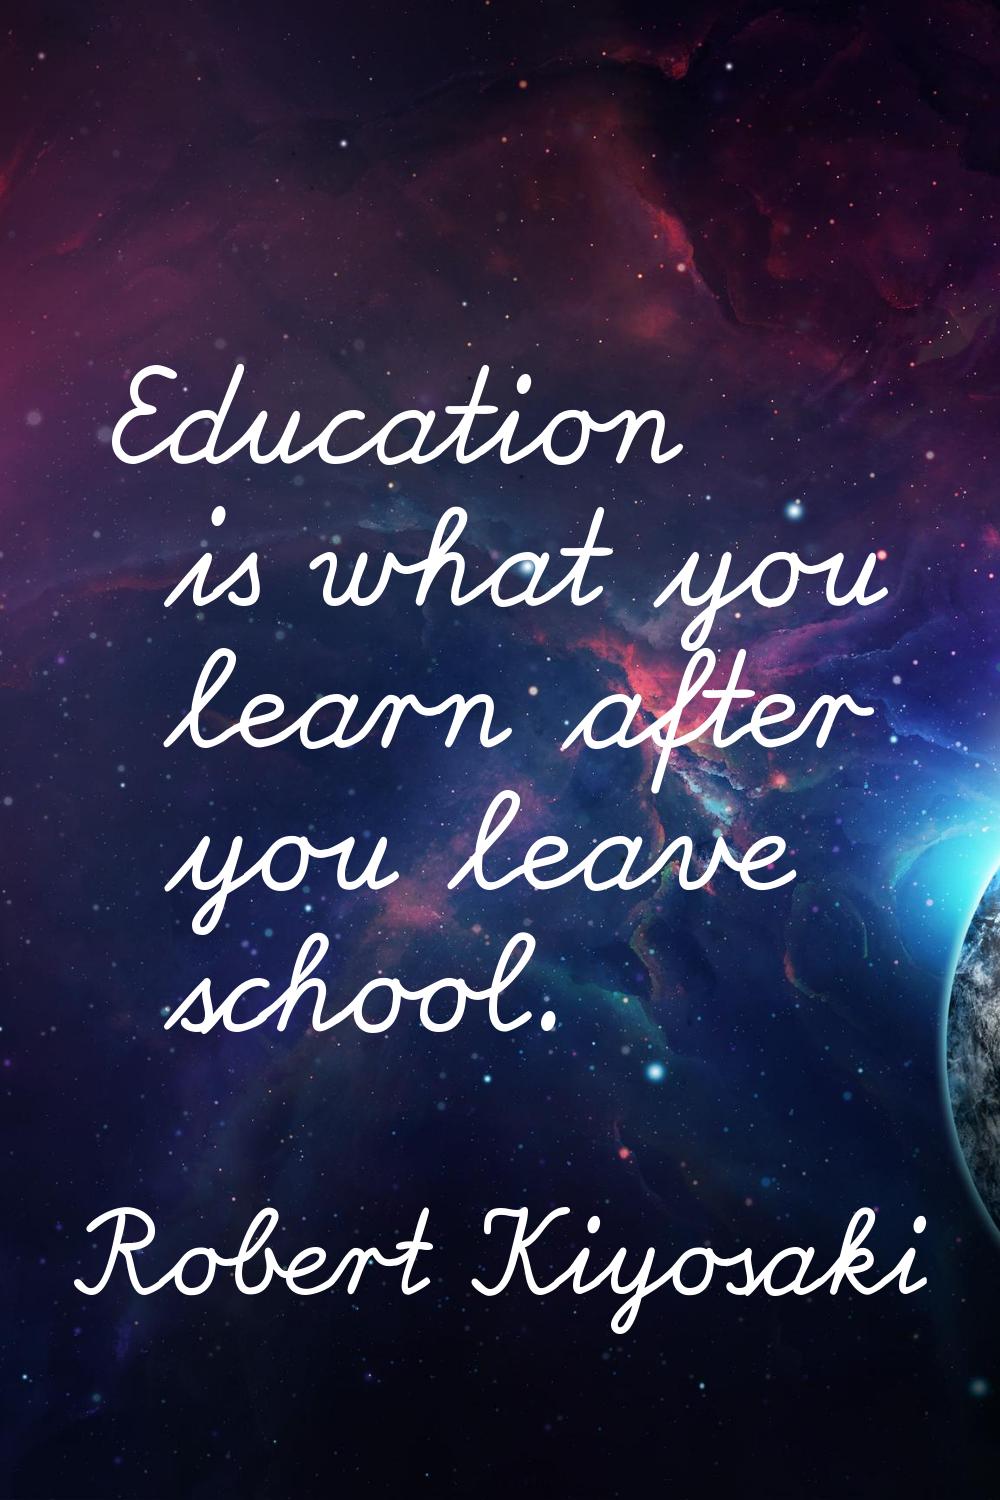 Education is what you learn after you leave school.